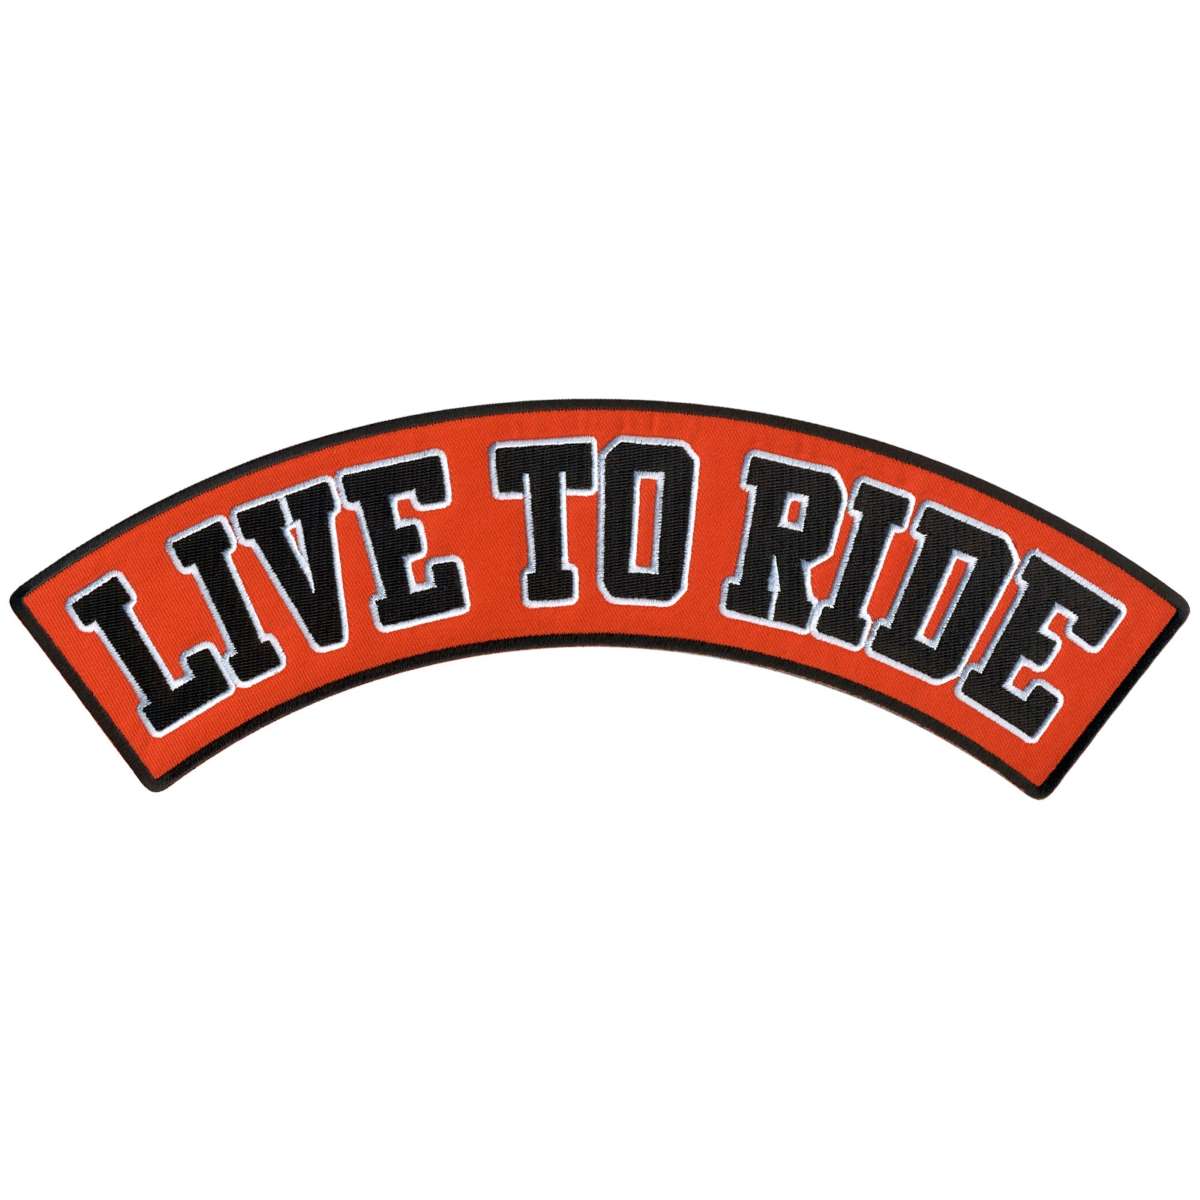 Hot Leathers Live To Ride 12” X 3” Top Rocker Patch PPM4141